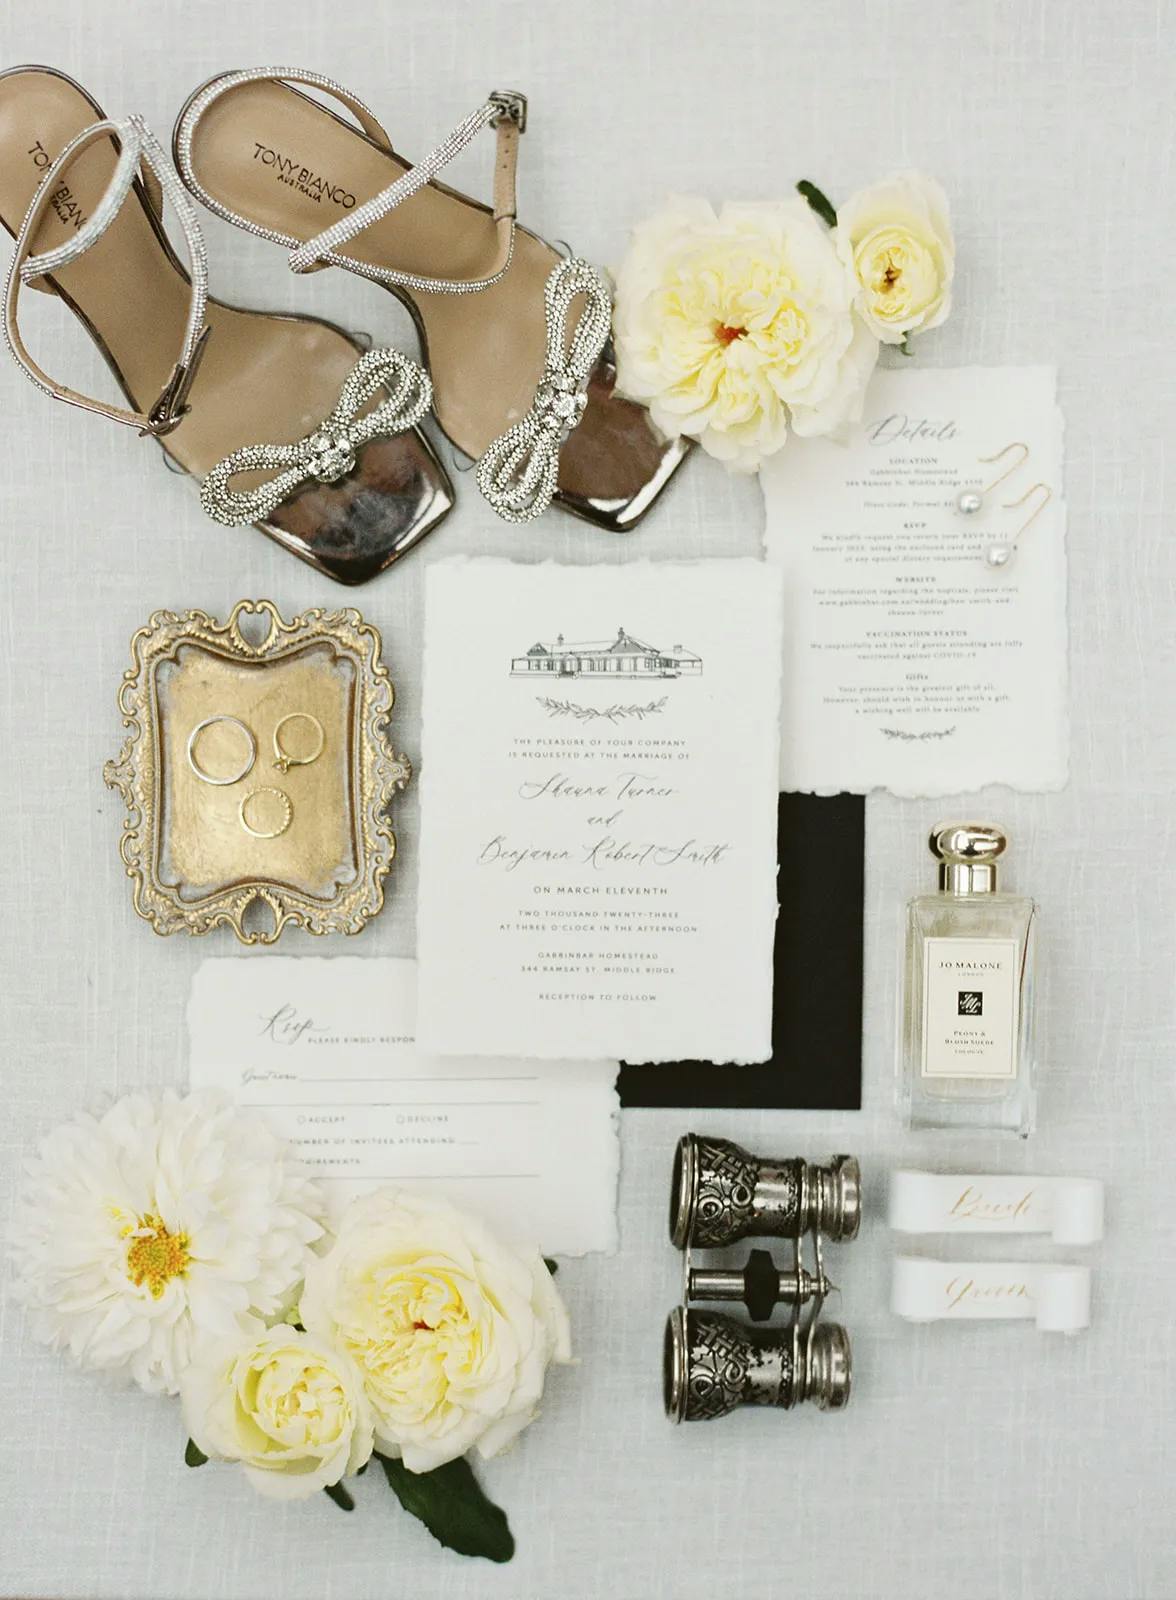 wedding shoes, invitations, perfumes and flowers